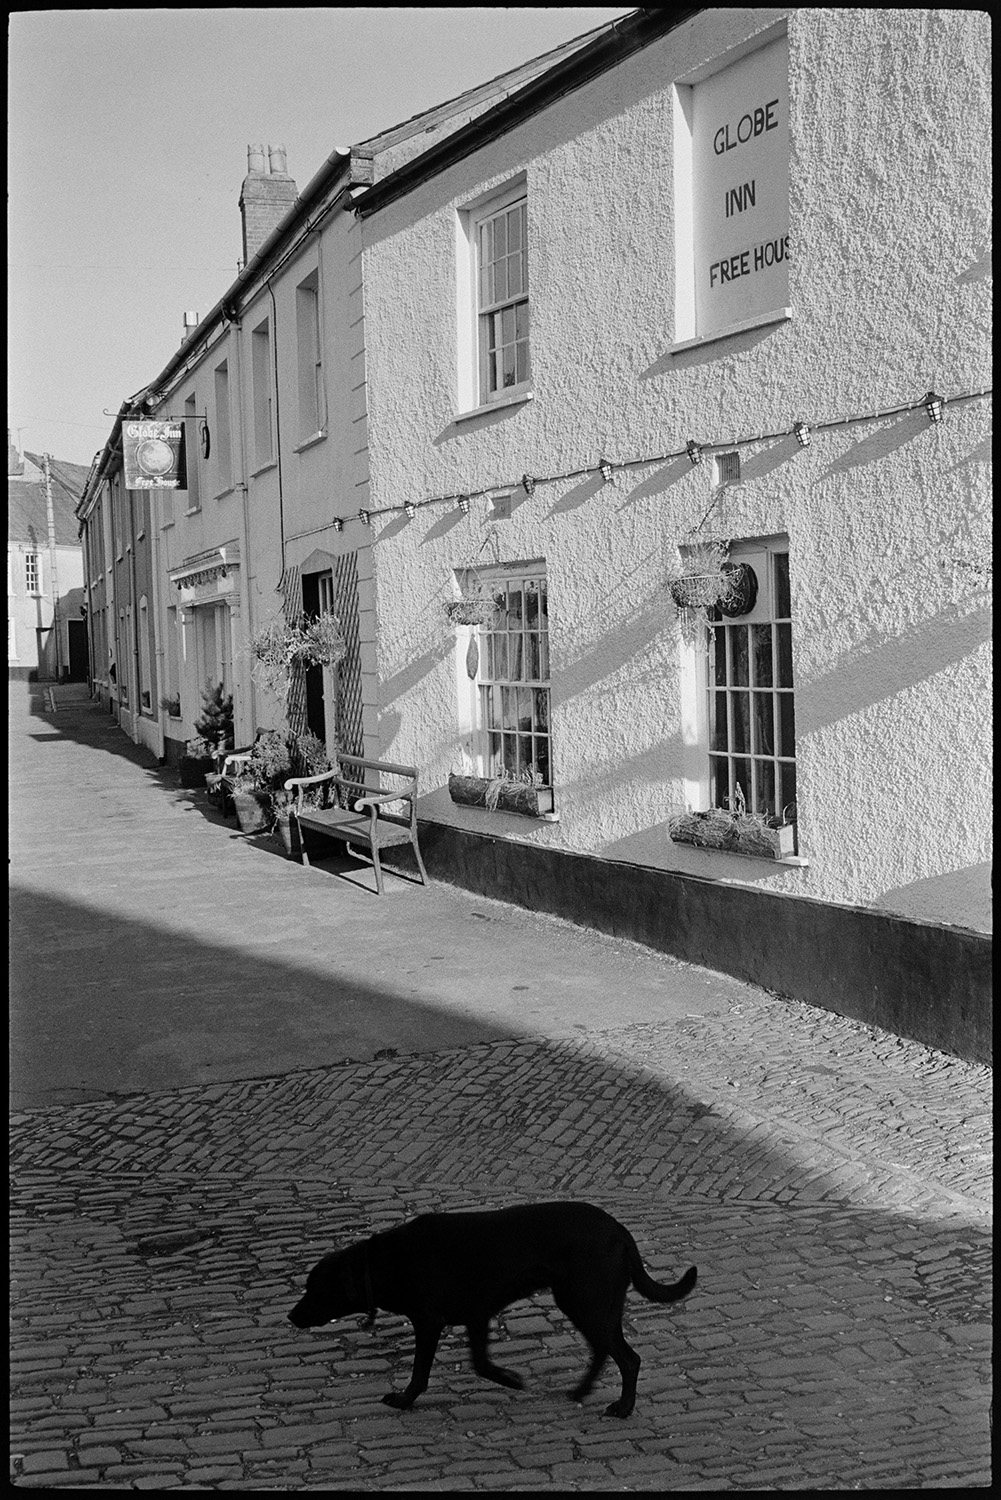 House and cobbled square, former school, porch. 
[A dog walking along a cobbled path outside the Globe Inn in Chulmleigh. The windows are decorated with hanging baskets and a bench is by the entrance to the pub.]